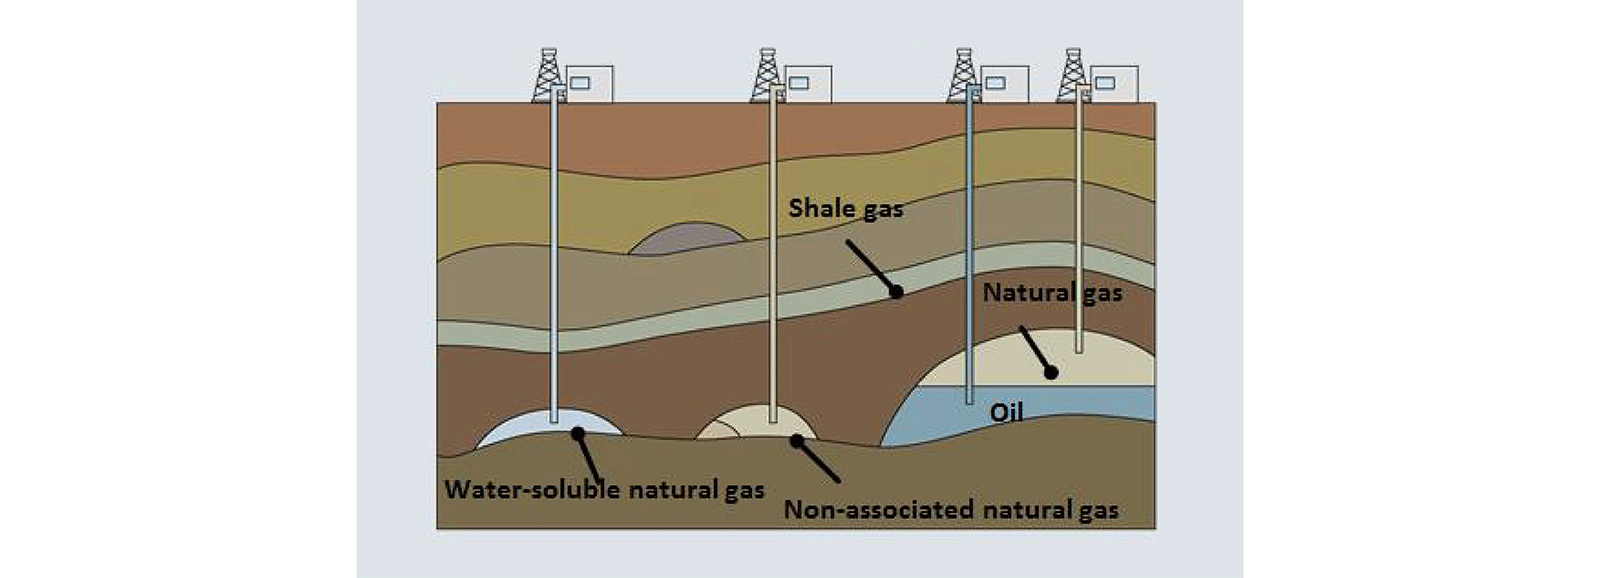 Conventional natural gas
